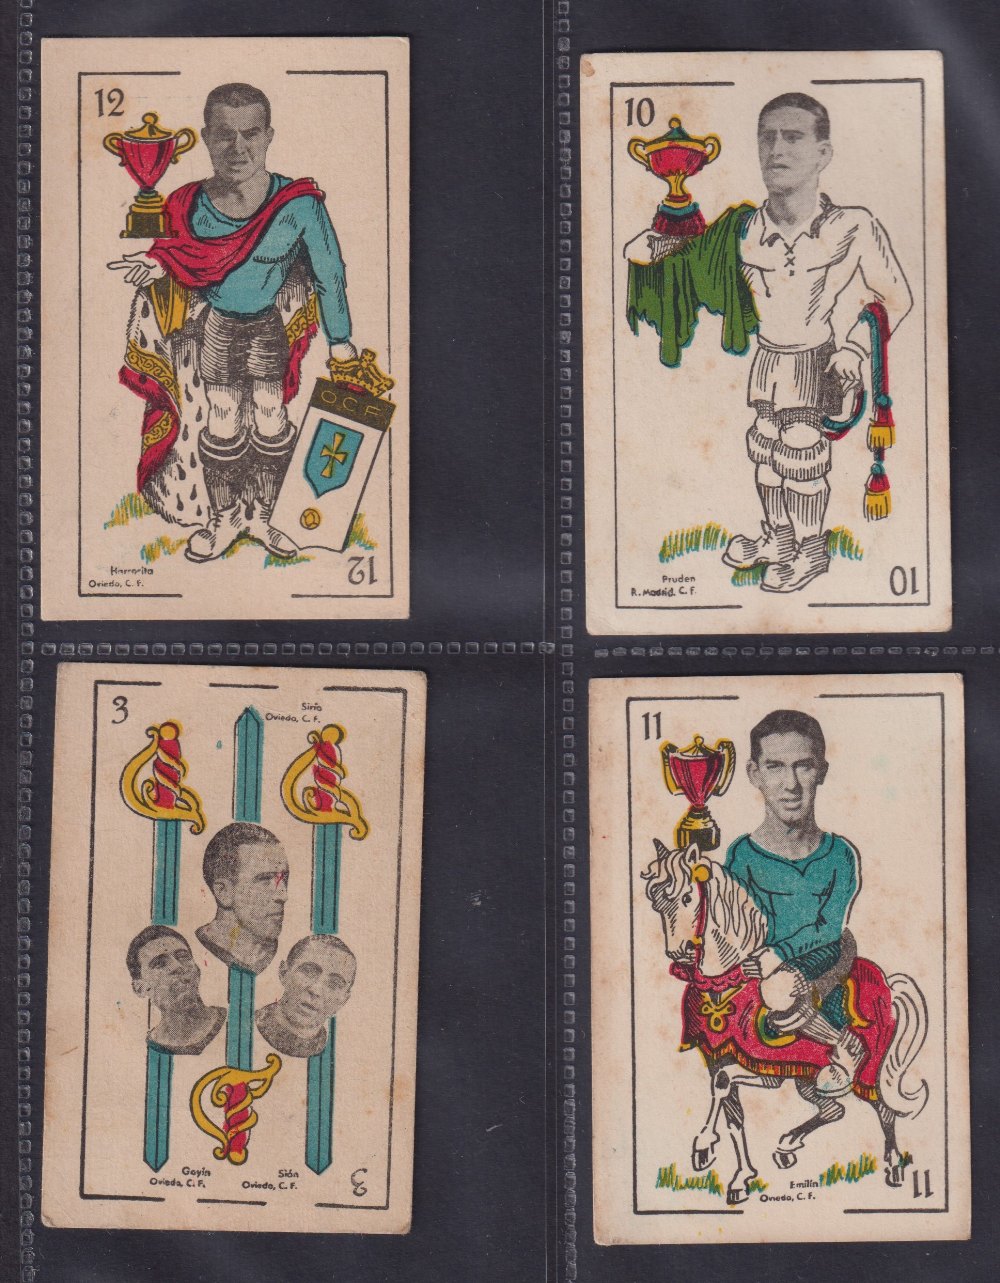 Trade cards, Spain, Universo, 38 different cards with Football Player portraits and artist-drawn - Image 8 of 11